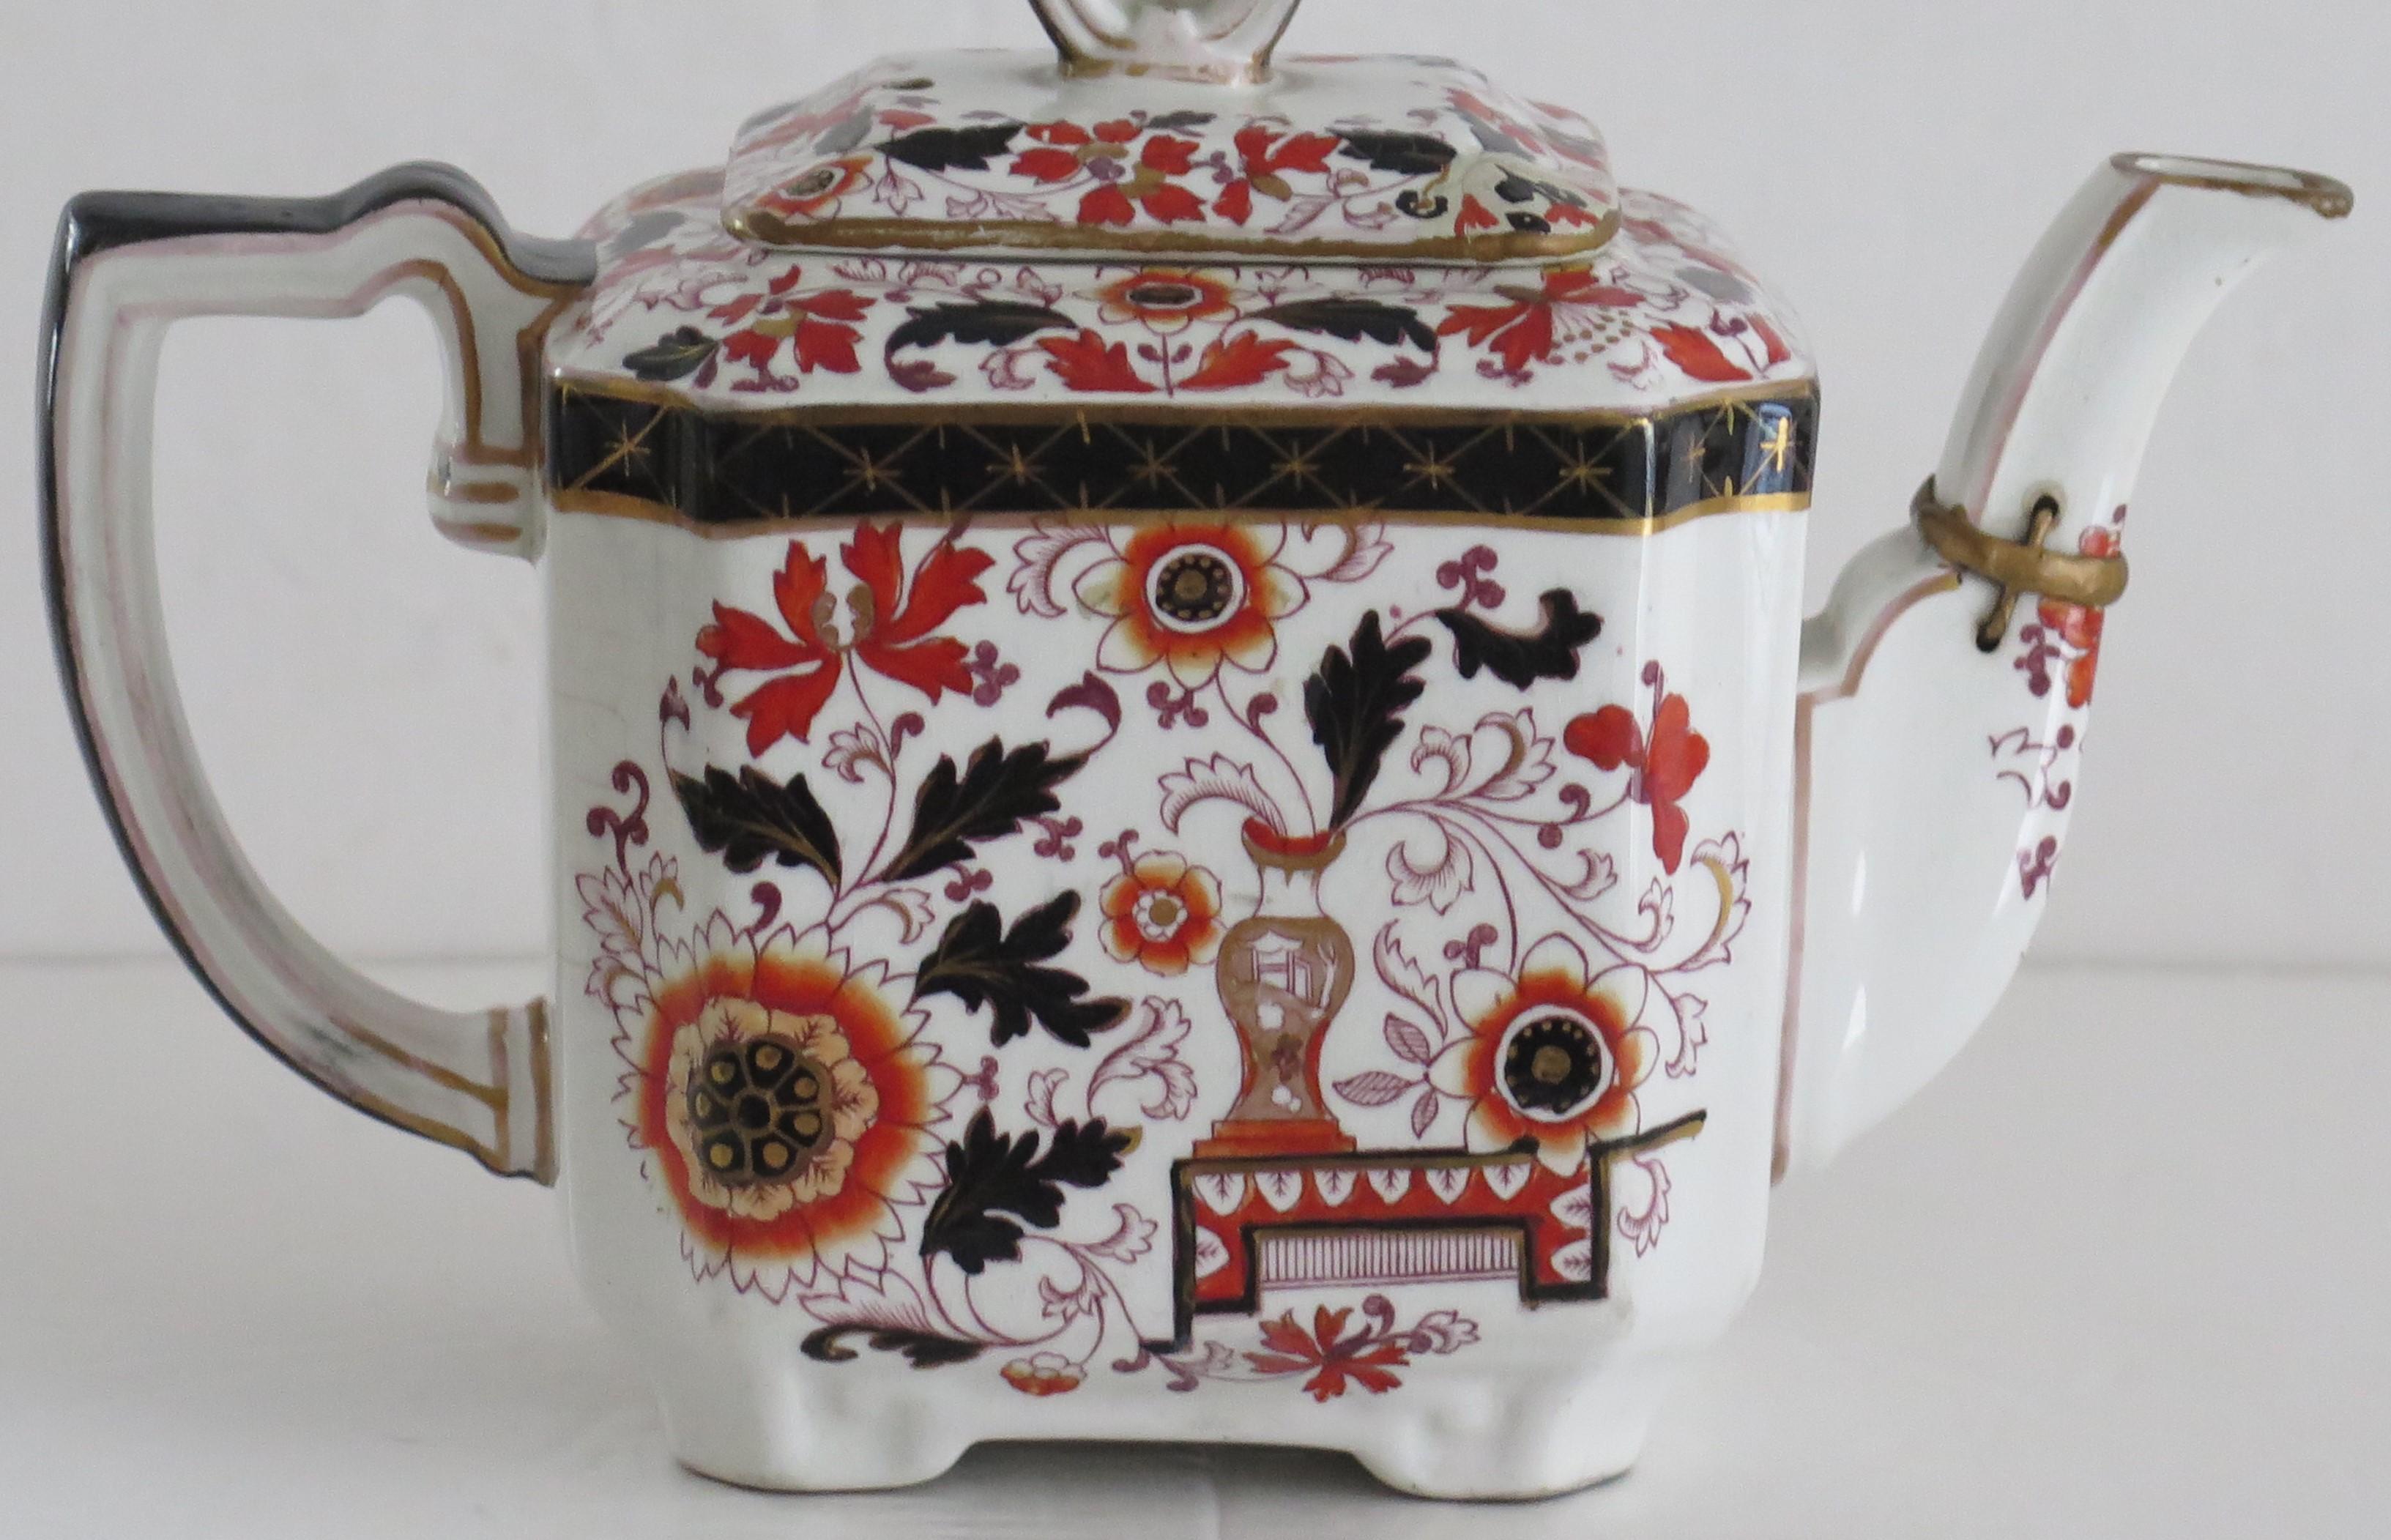 Mason's Ashworth's Ironstone Teapot in Old Japan Vase Pattern, circa 1875 In Good Condition For Sale In Lincoln, Lincolnshire